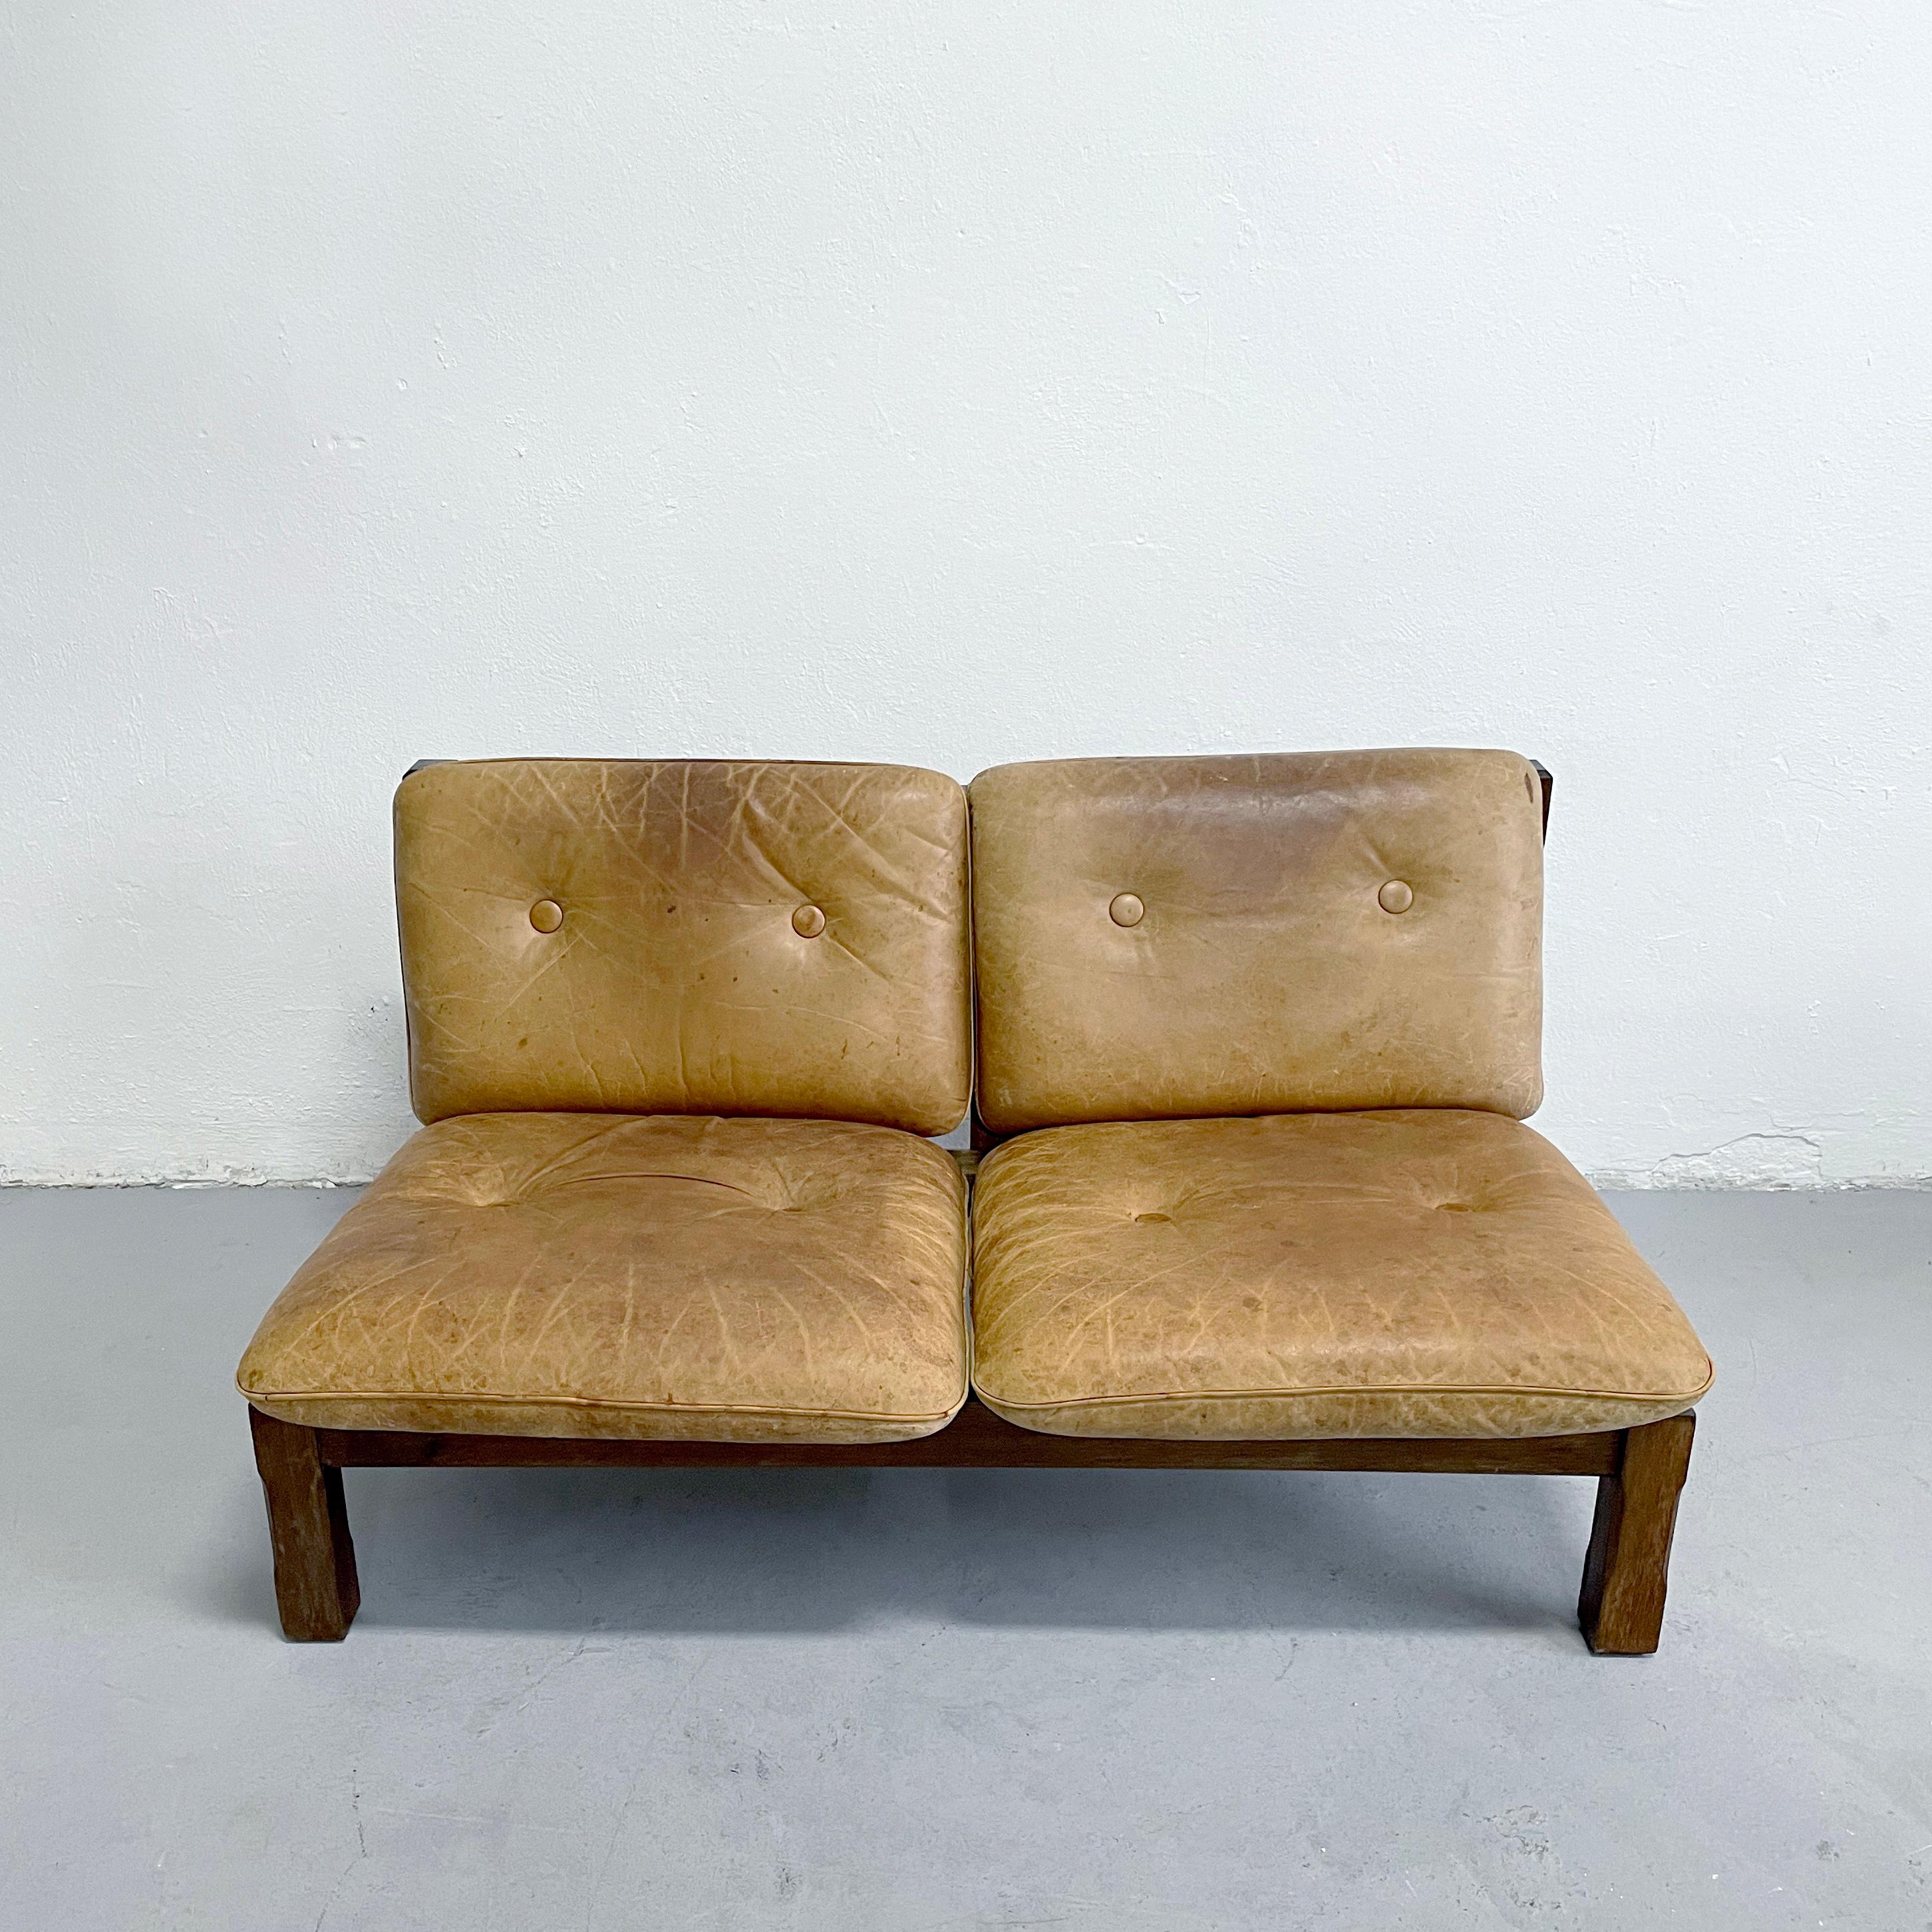 20th Century Mid Century Brutalist Sofa in Solid Oak and Leather, 1960s